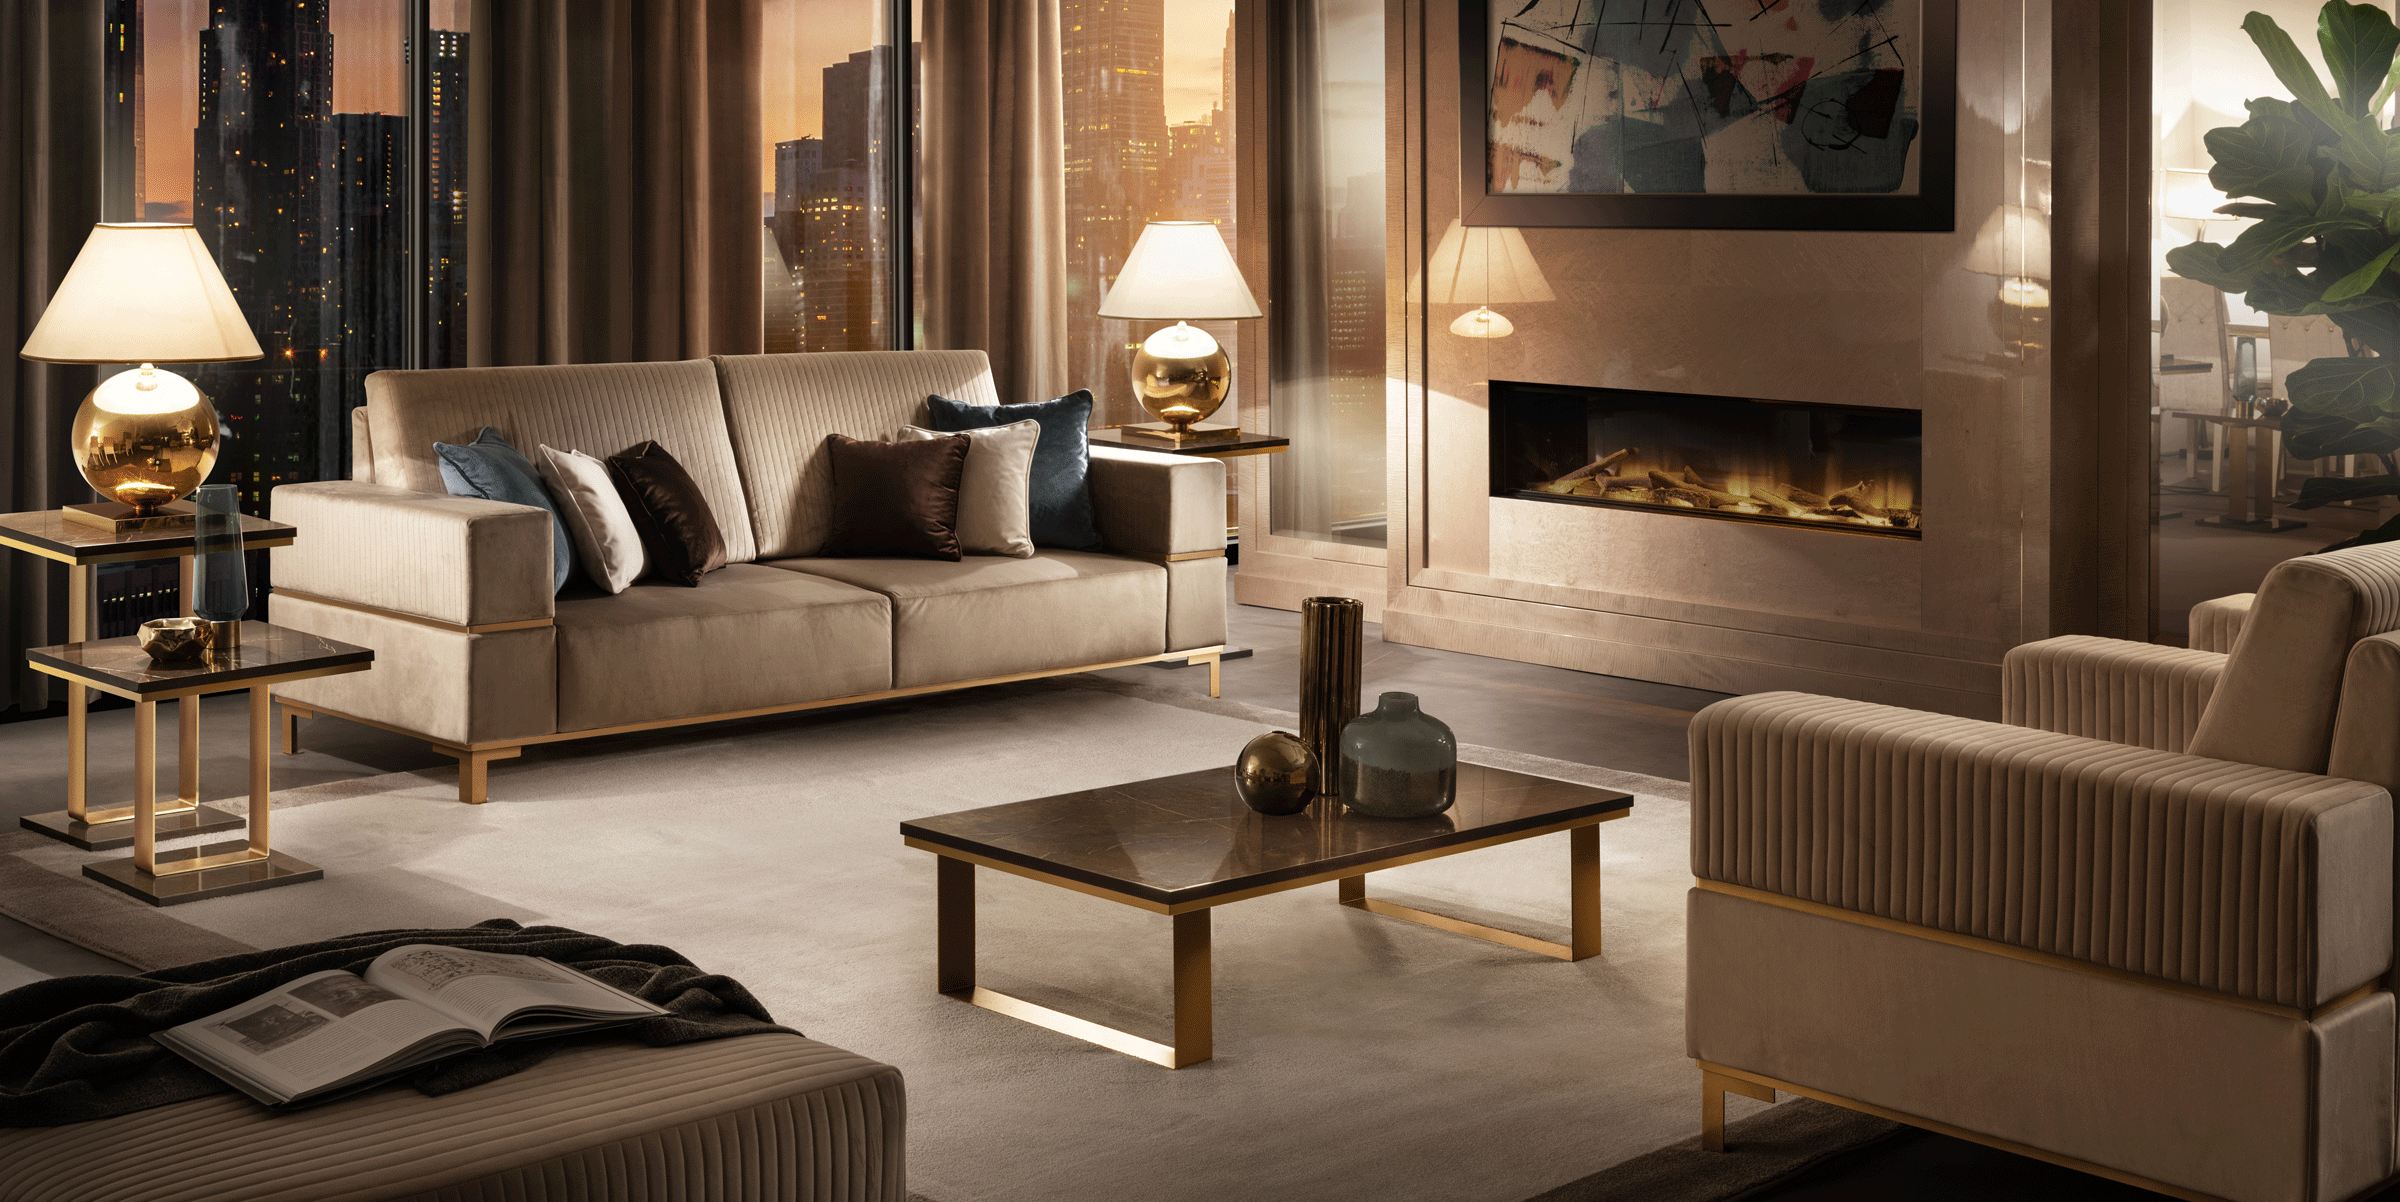 Brands Arredoclassic Bedroom, Italy Essenza Living by Arredoclassic, Italy